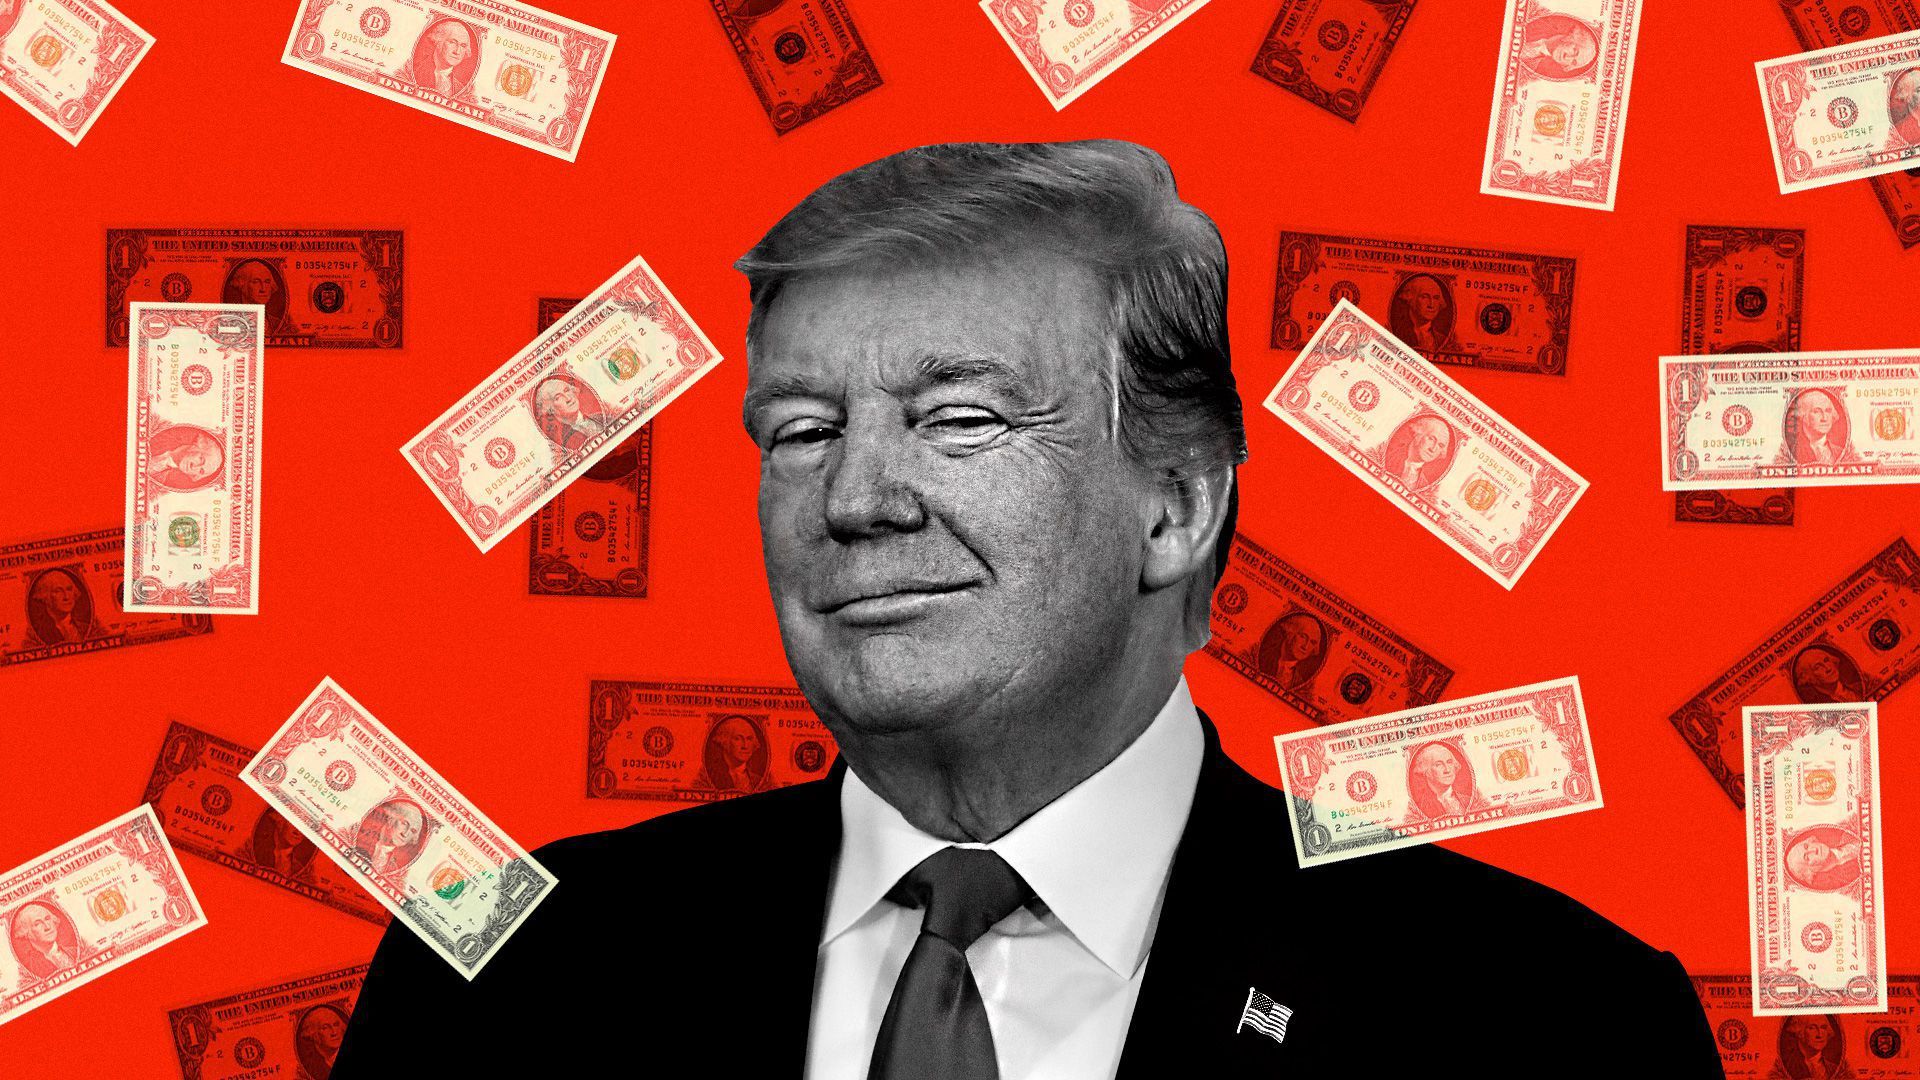 Trump surrounded by money